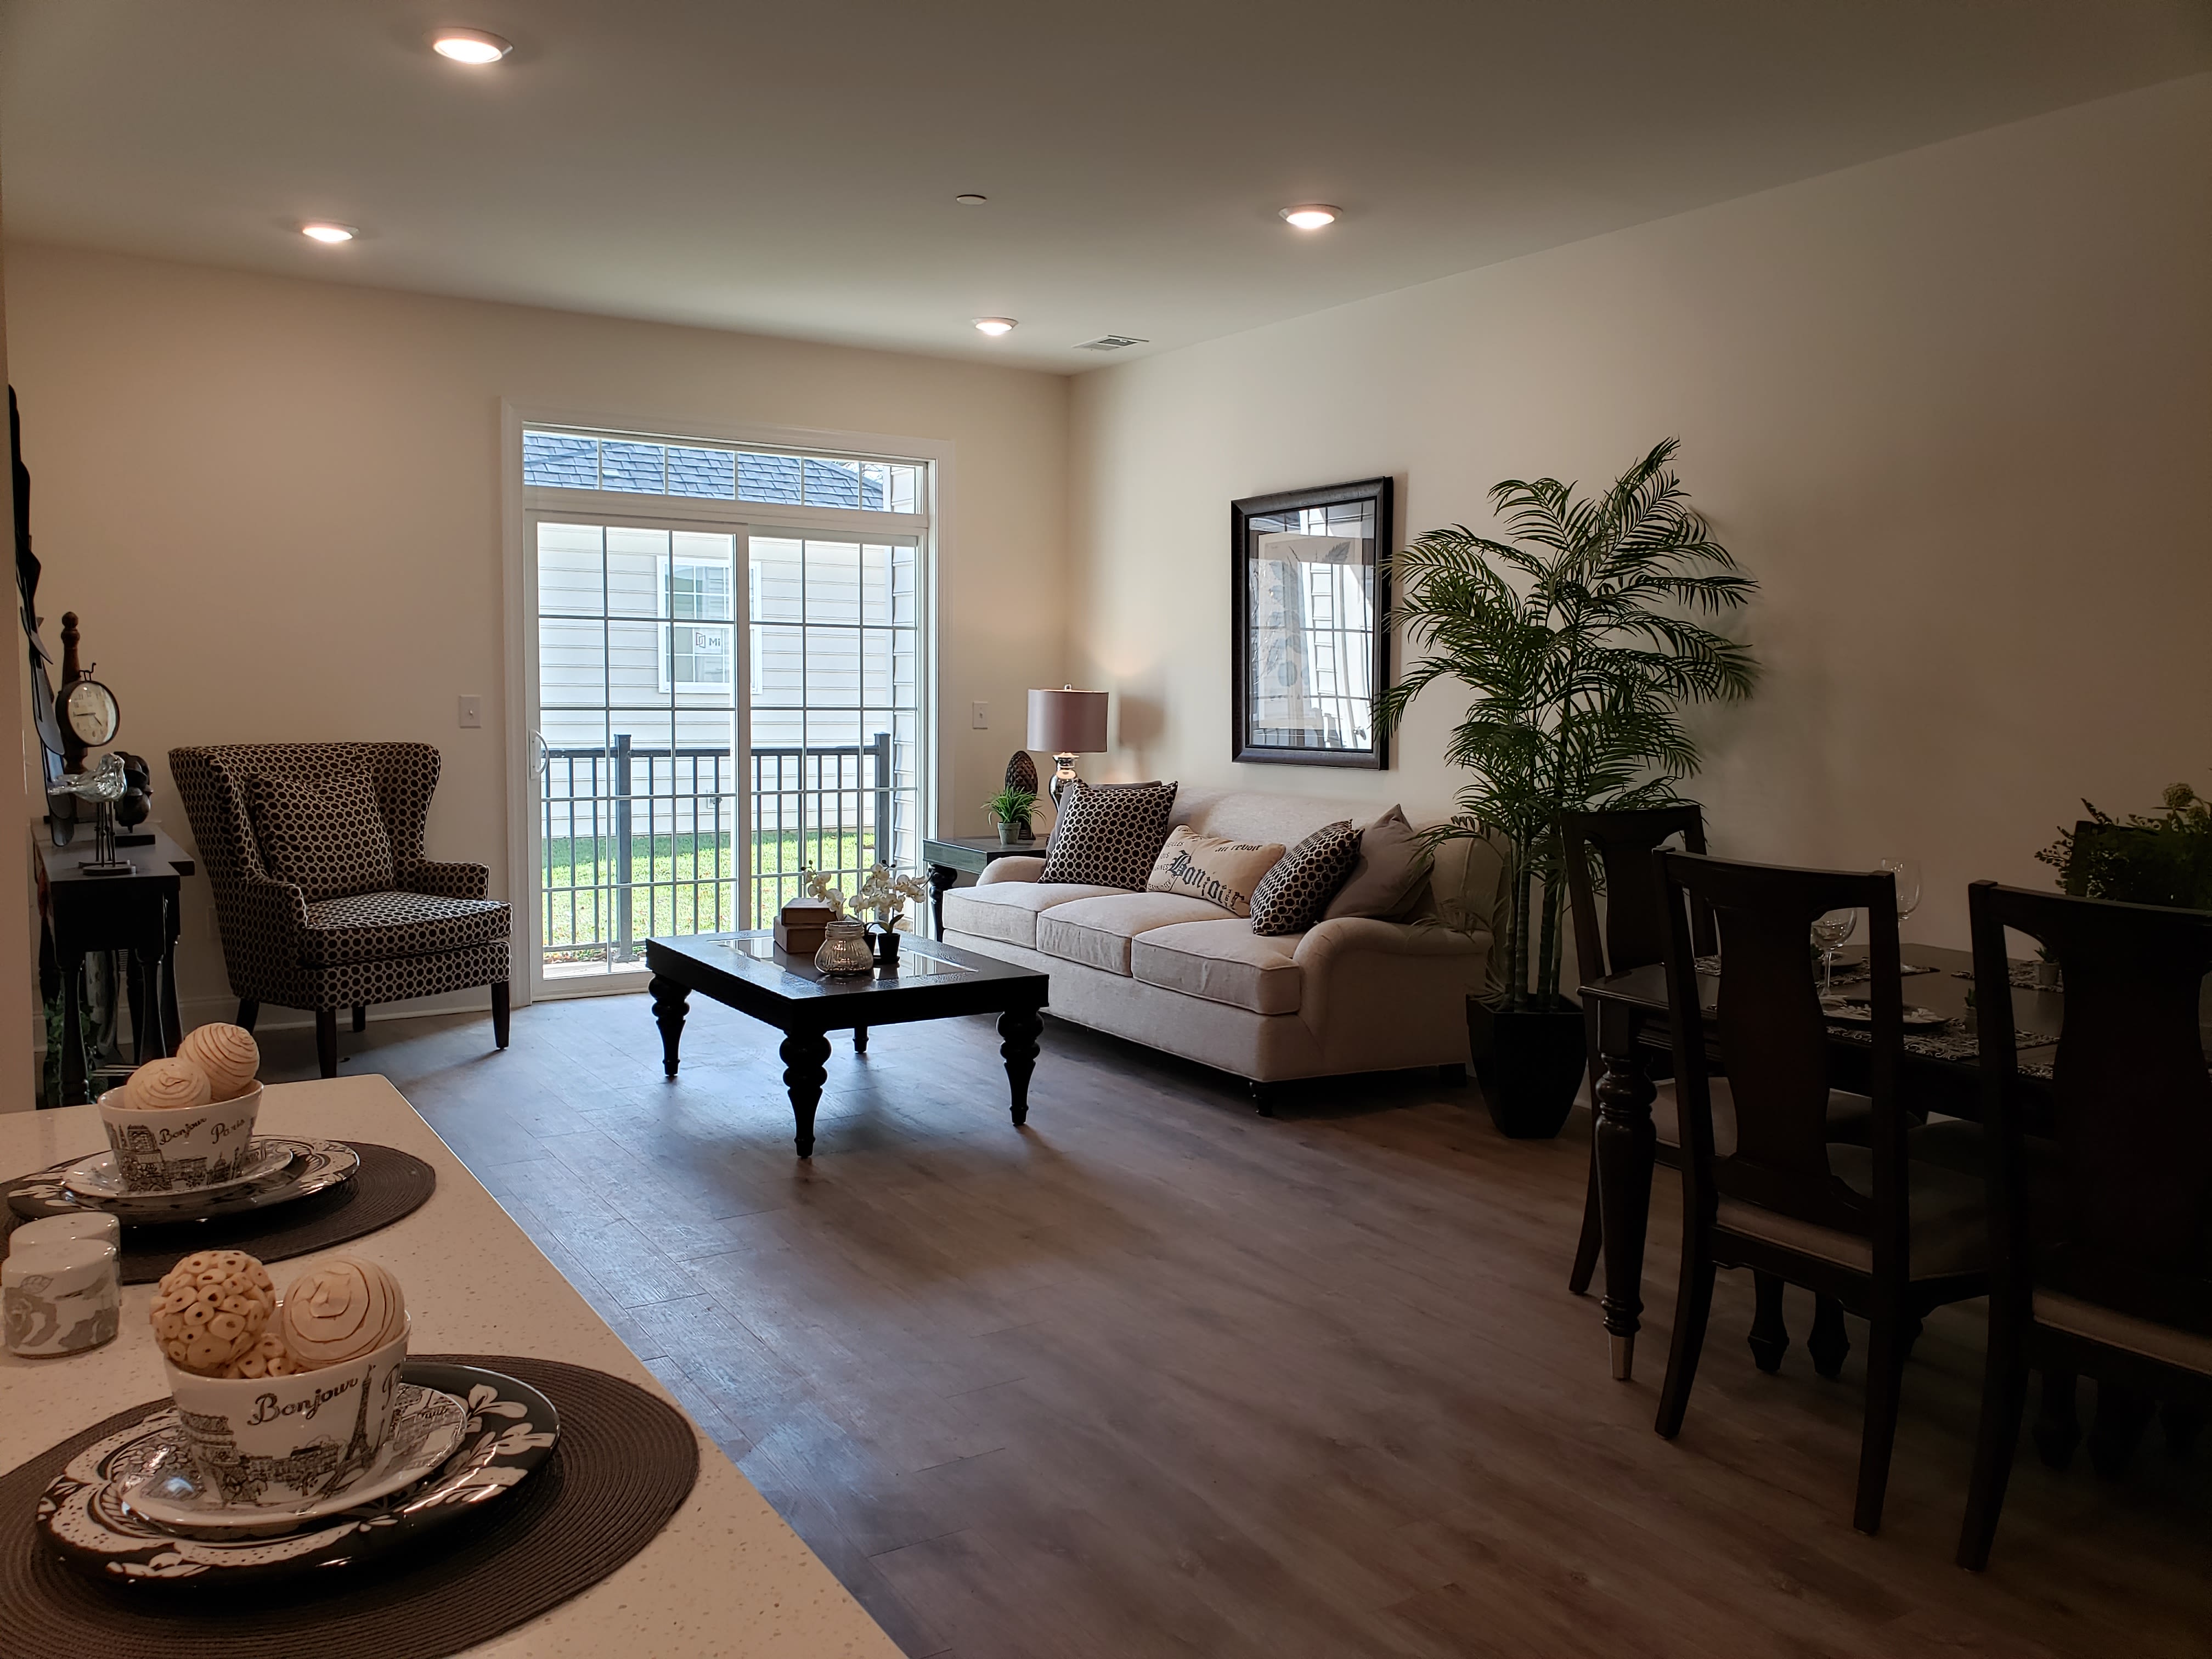 Living room at The Residences at St. Joseph Court, Levittown, Pennsylvania